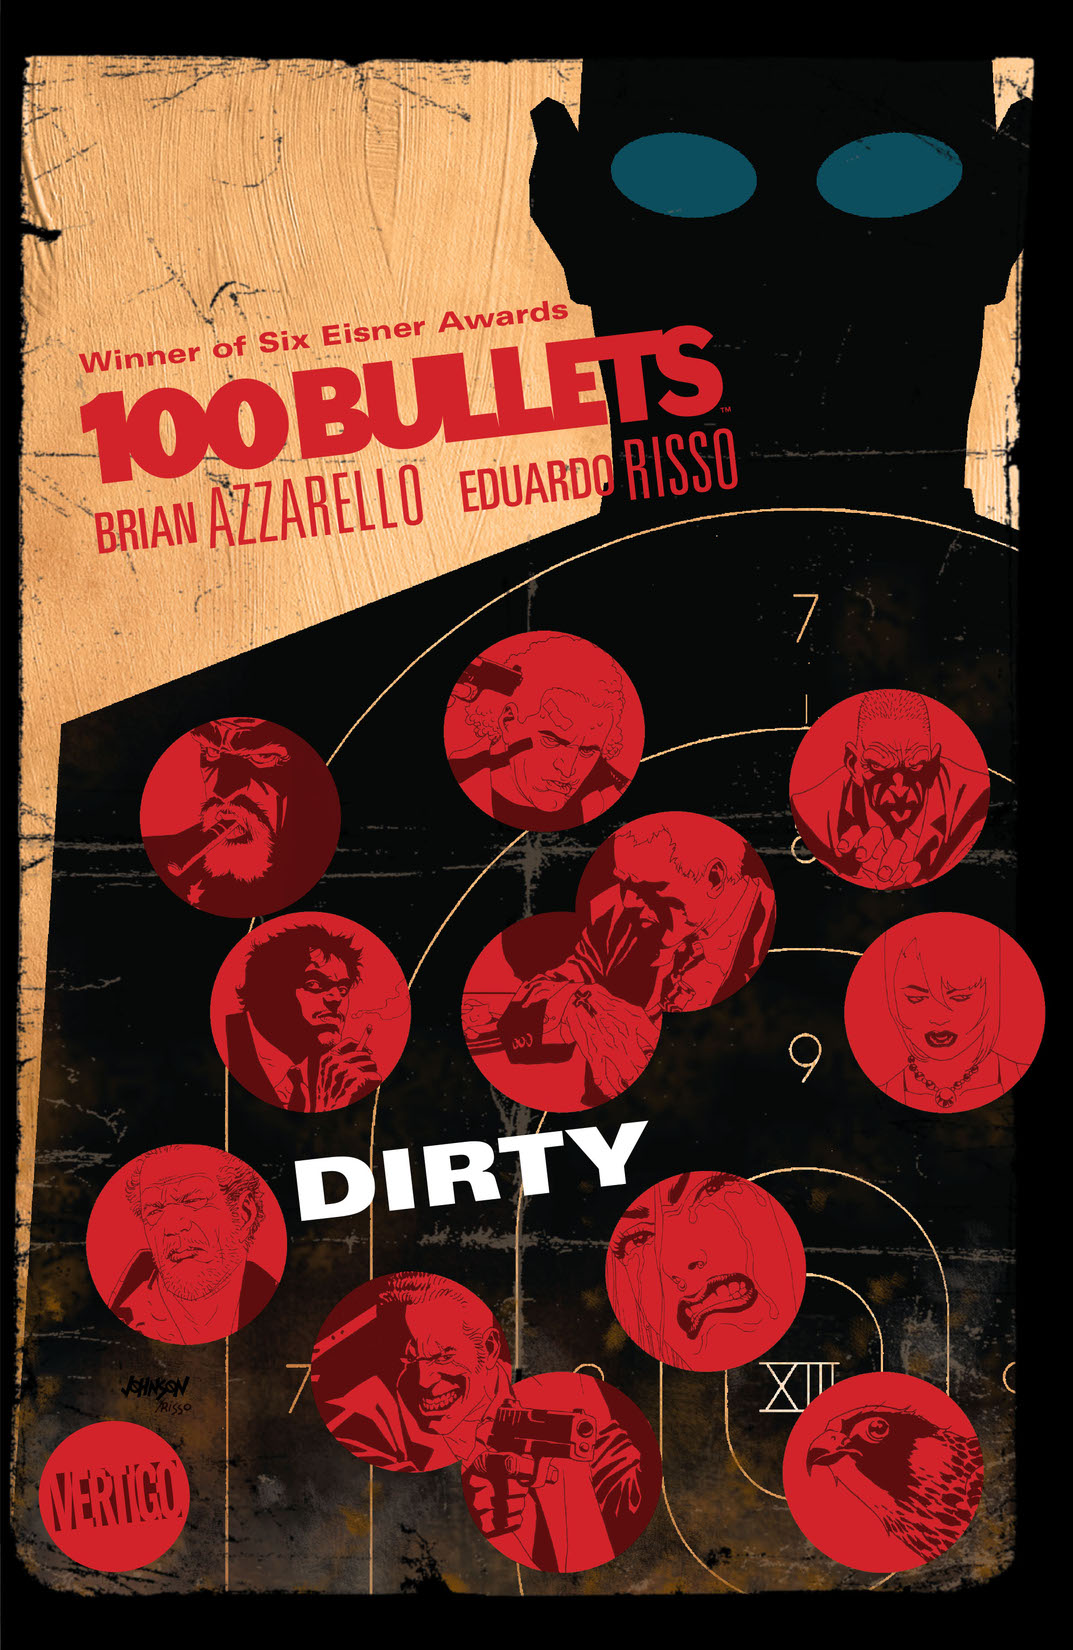 100 Bullets Vol. 12: Dirty preview images